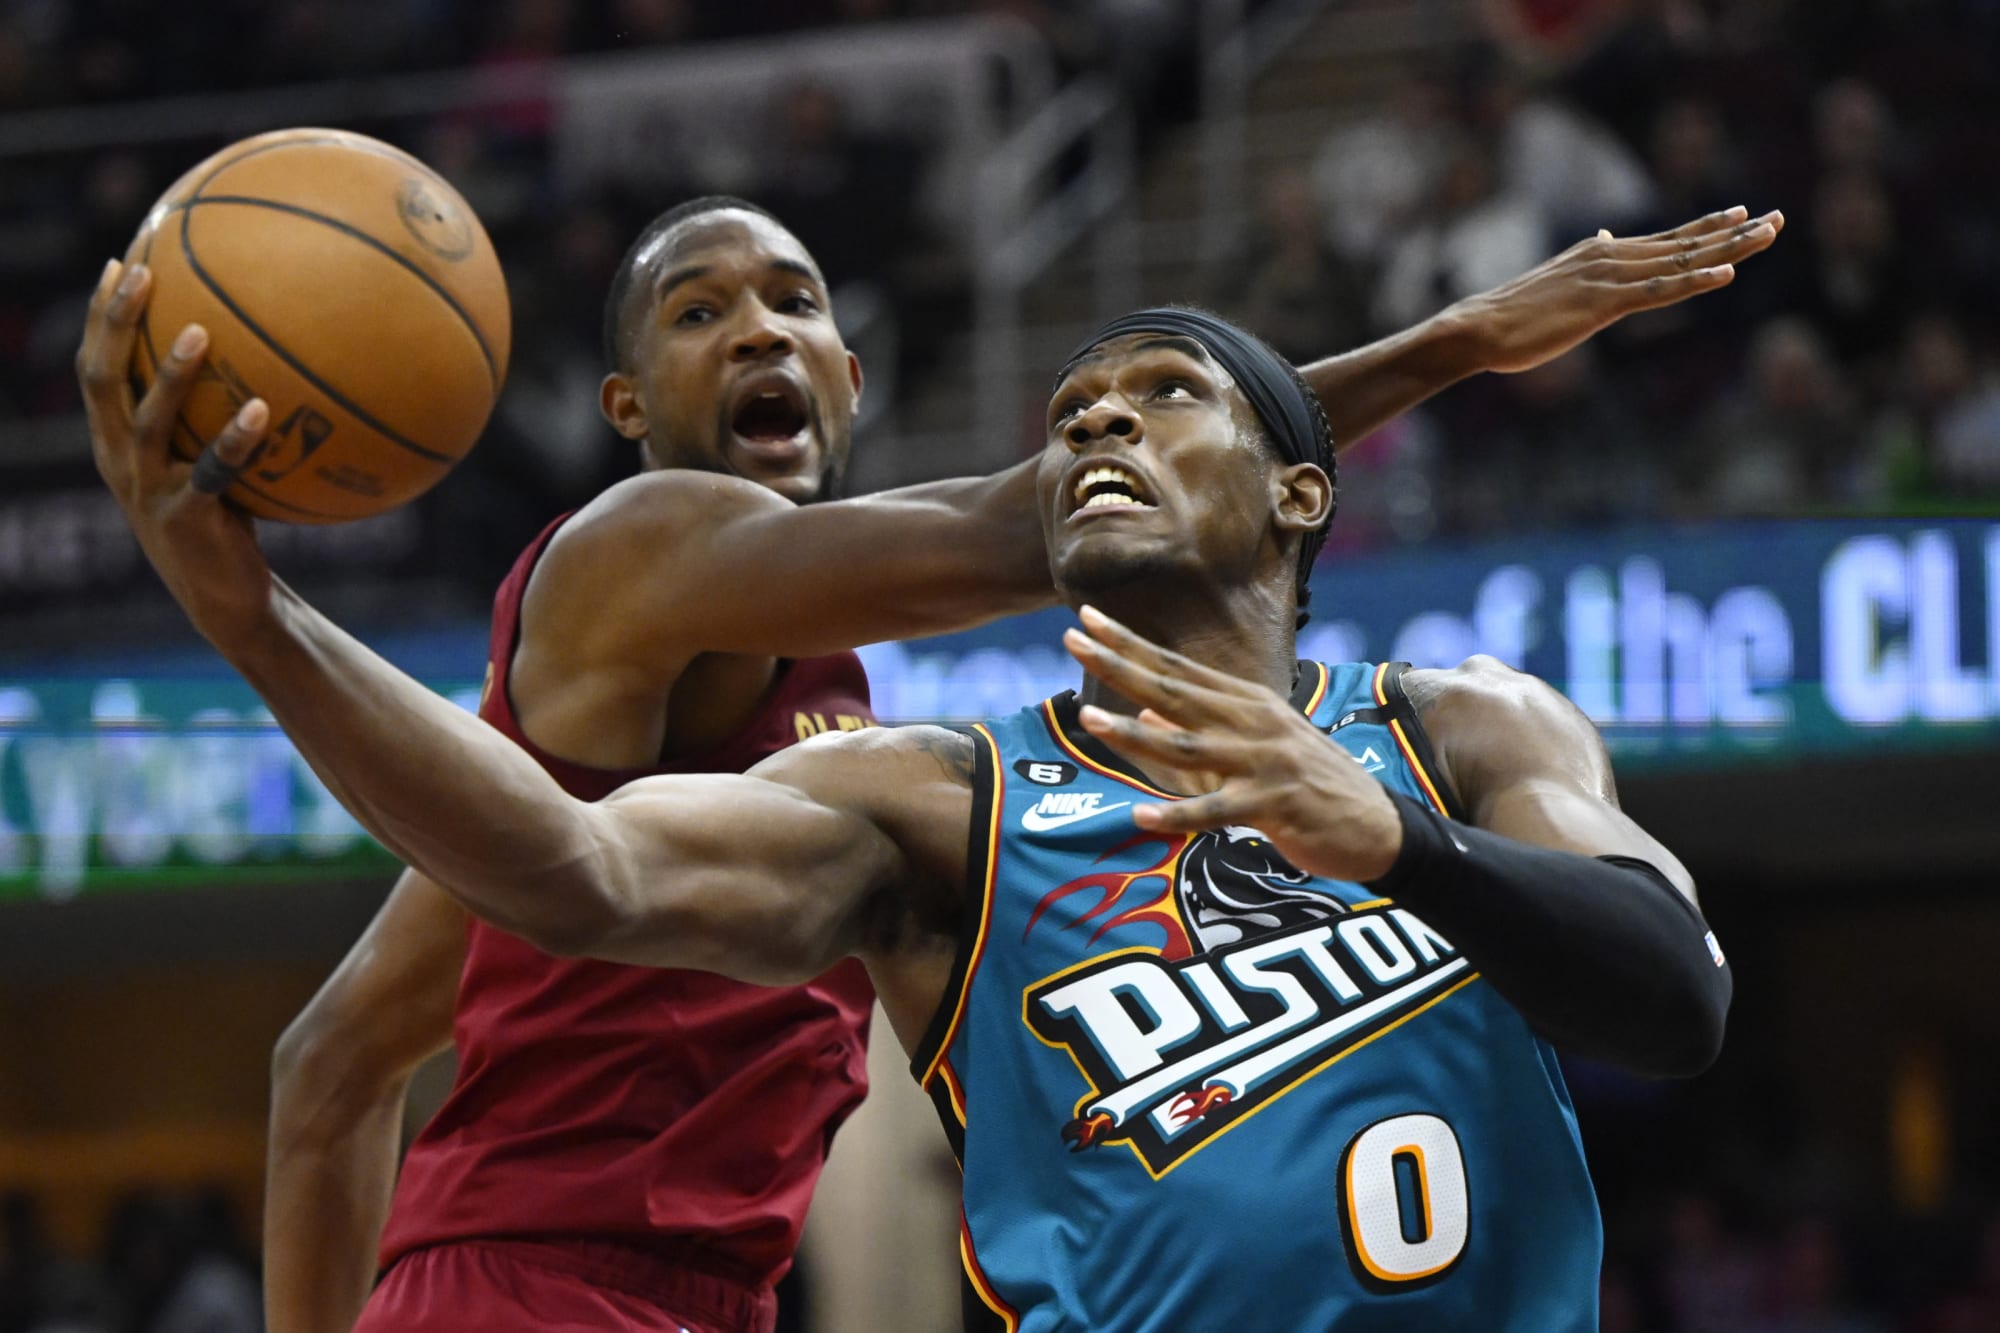 Detroit Pistons in Teal: In defense of 'ugly' jerseys - Detroit